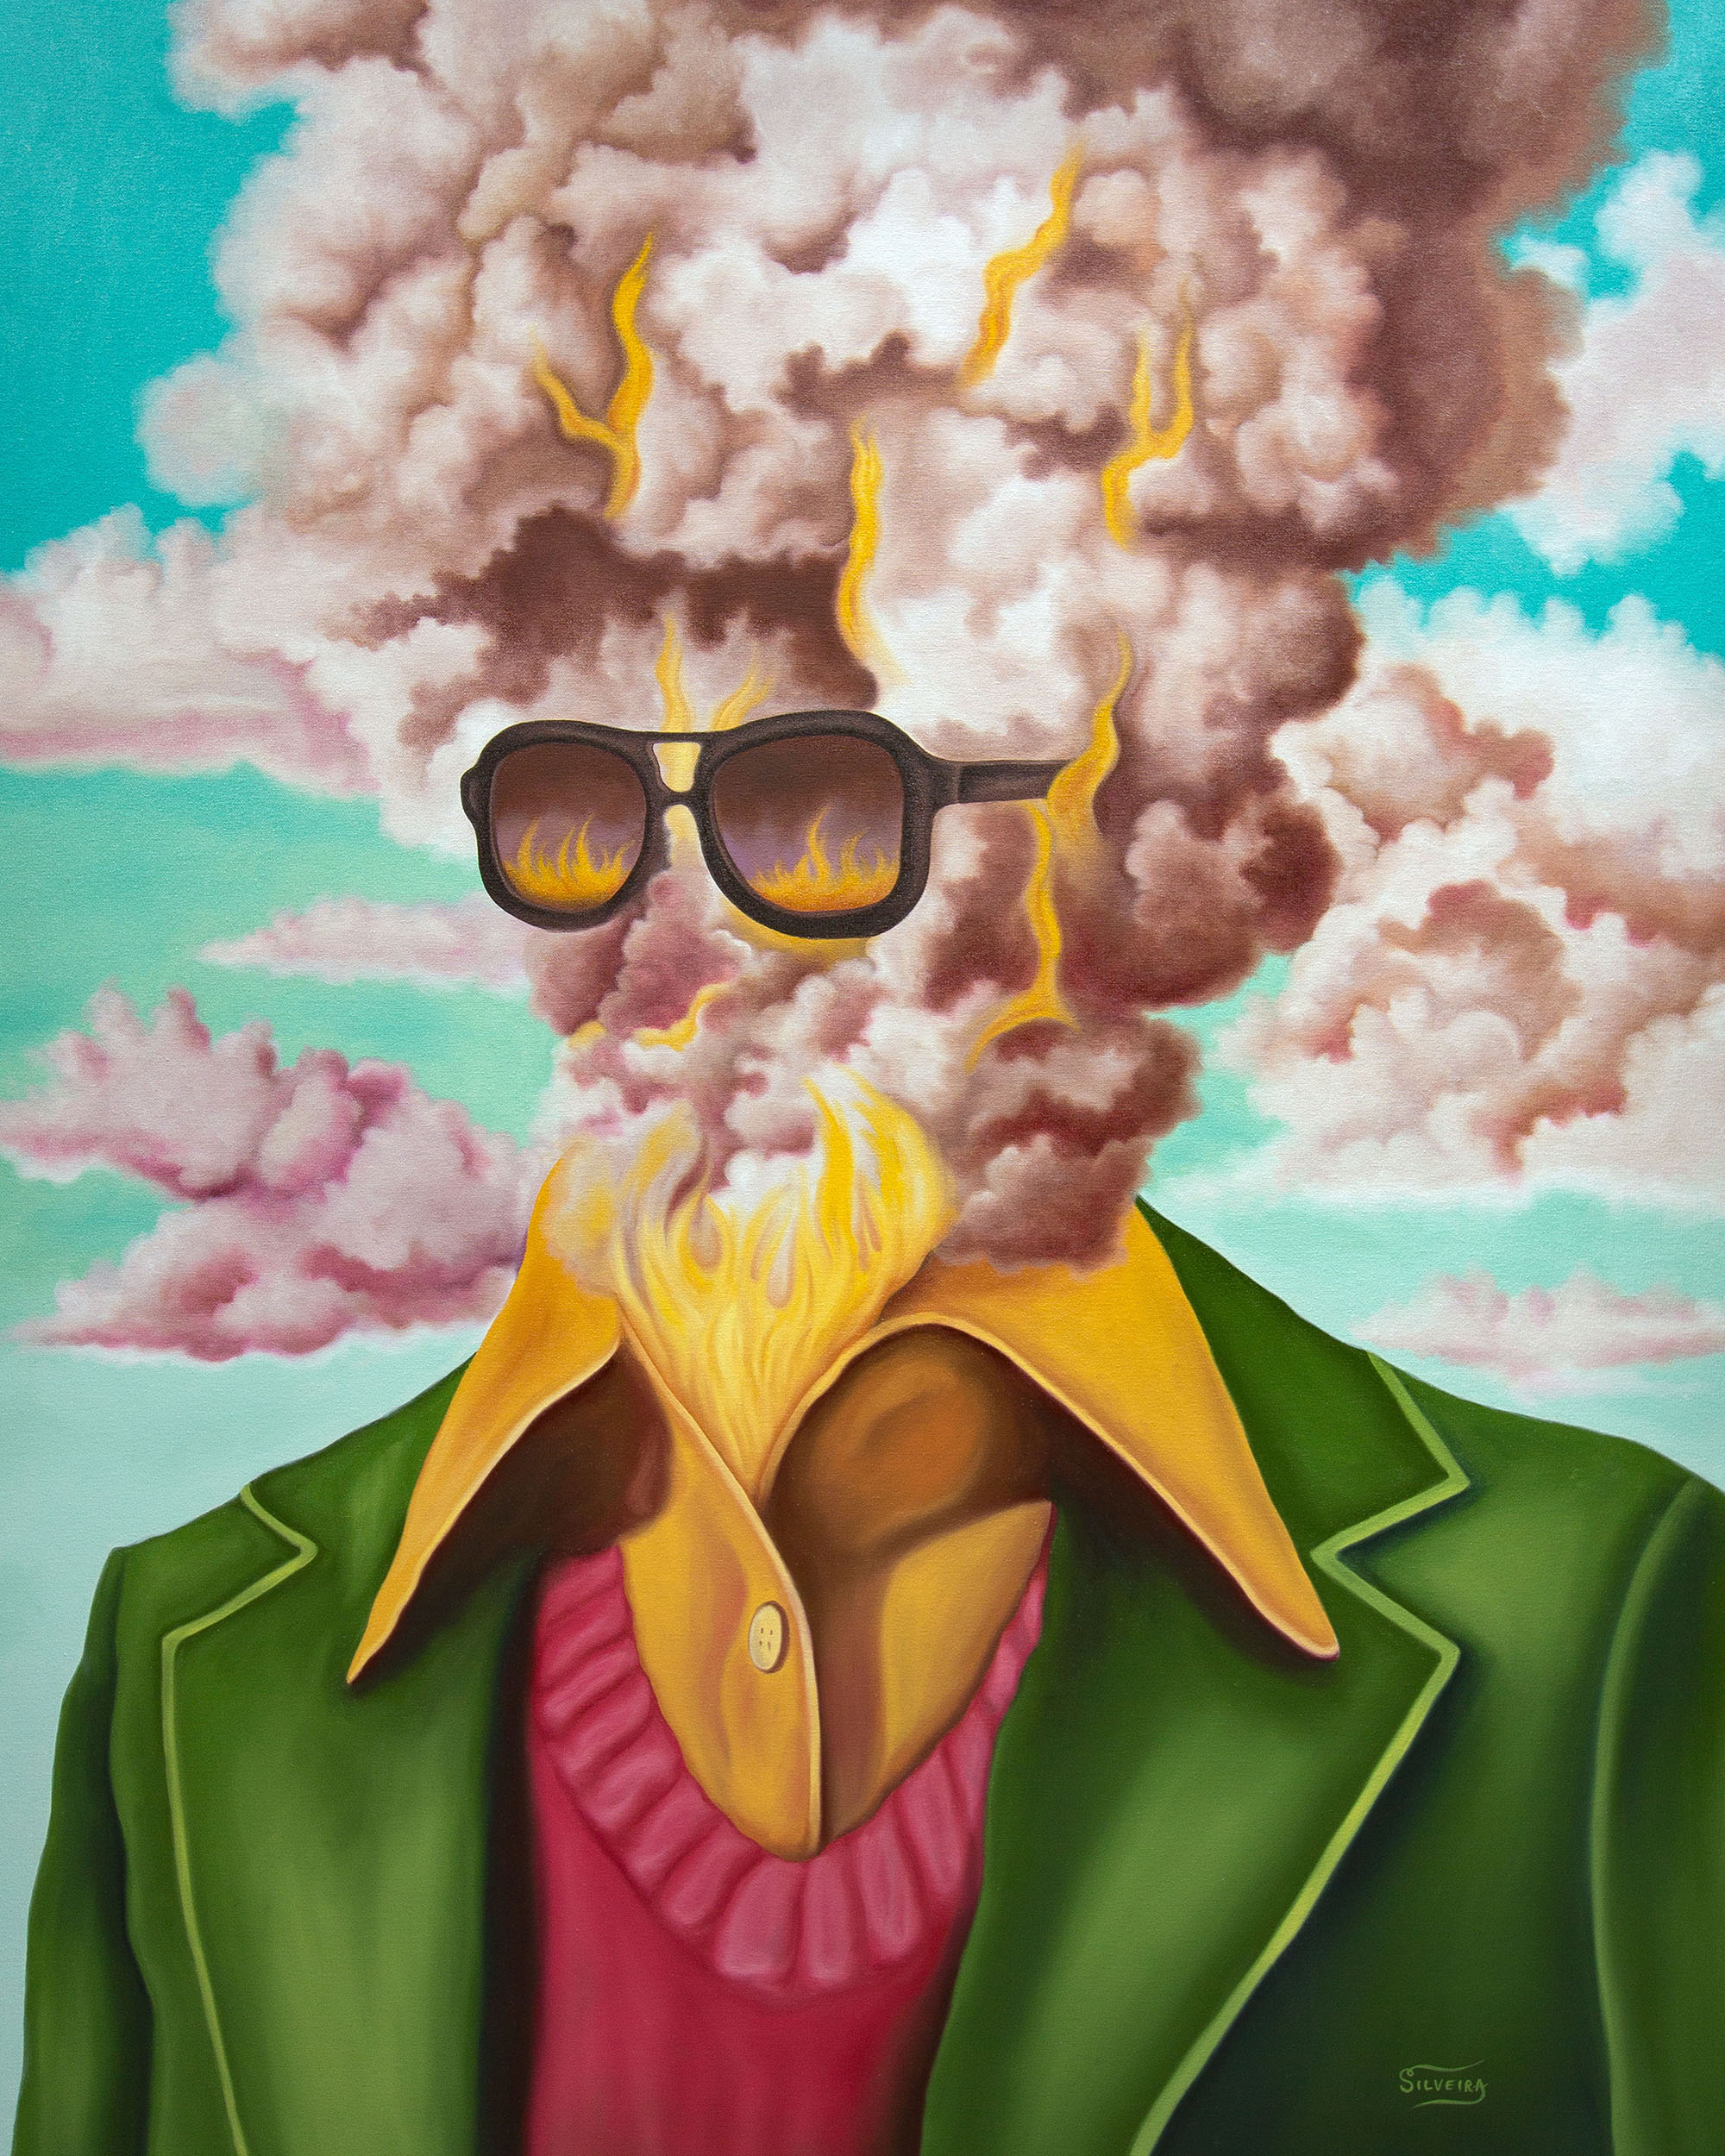 A vibrant and colorful portrait of a figure without a head, but instead a large cloud of smoke, lightning, flames, and sunglasses.